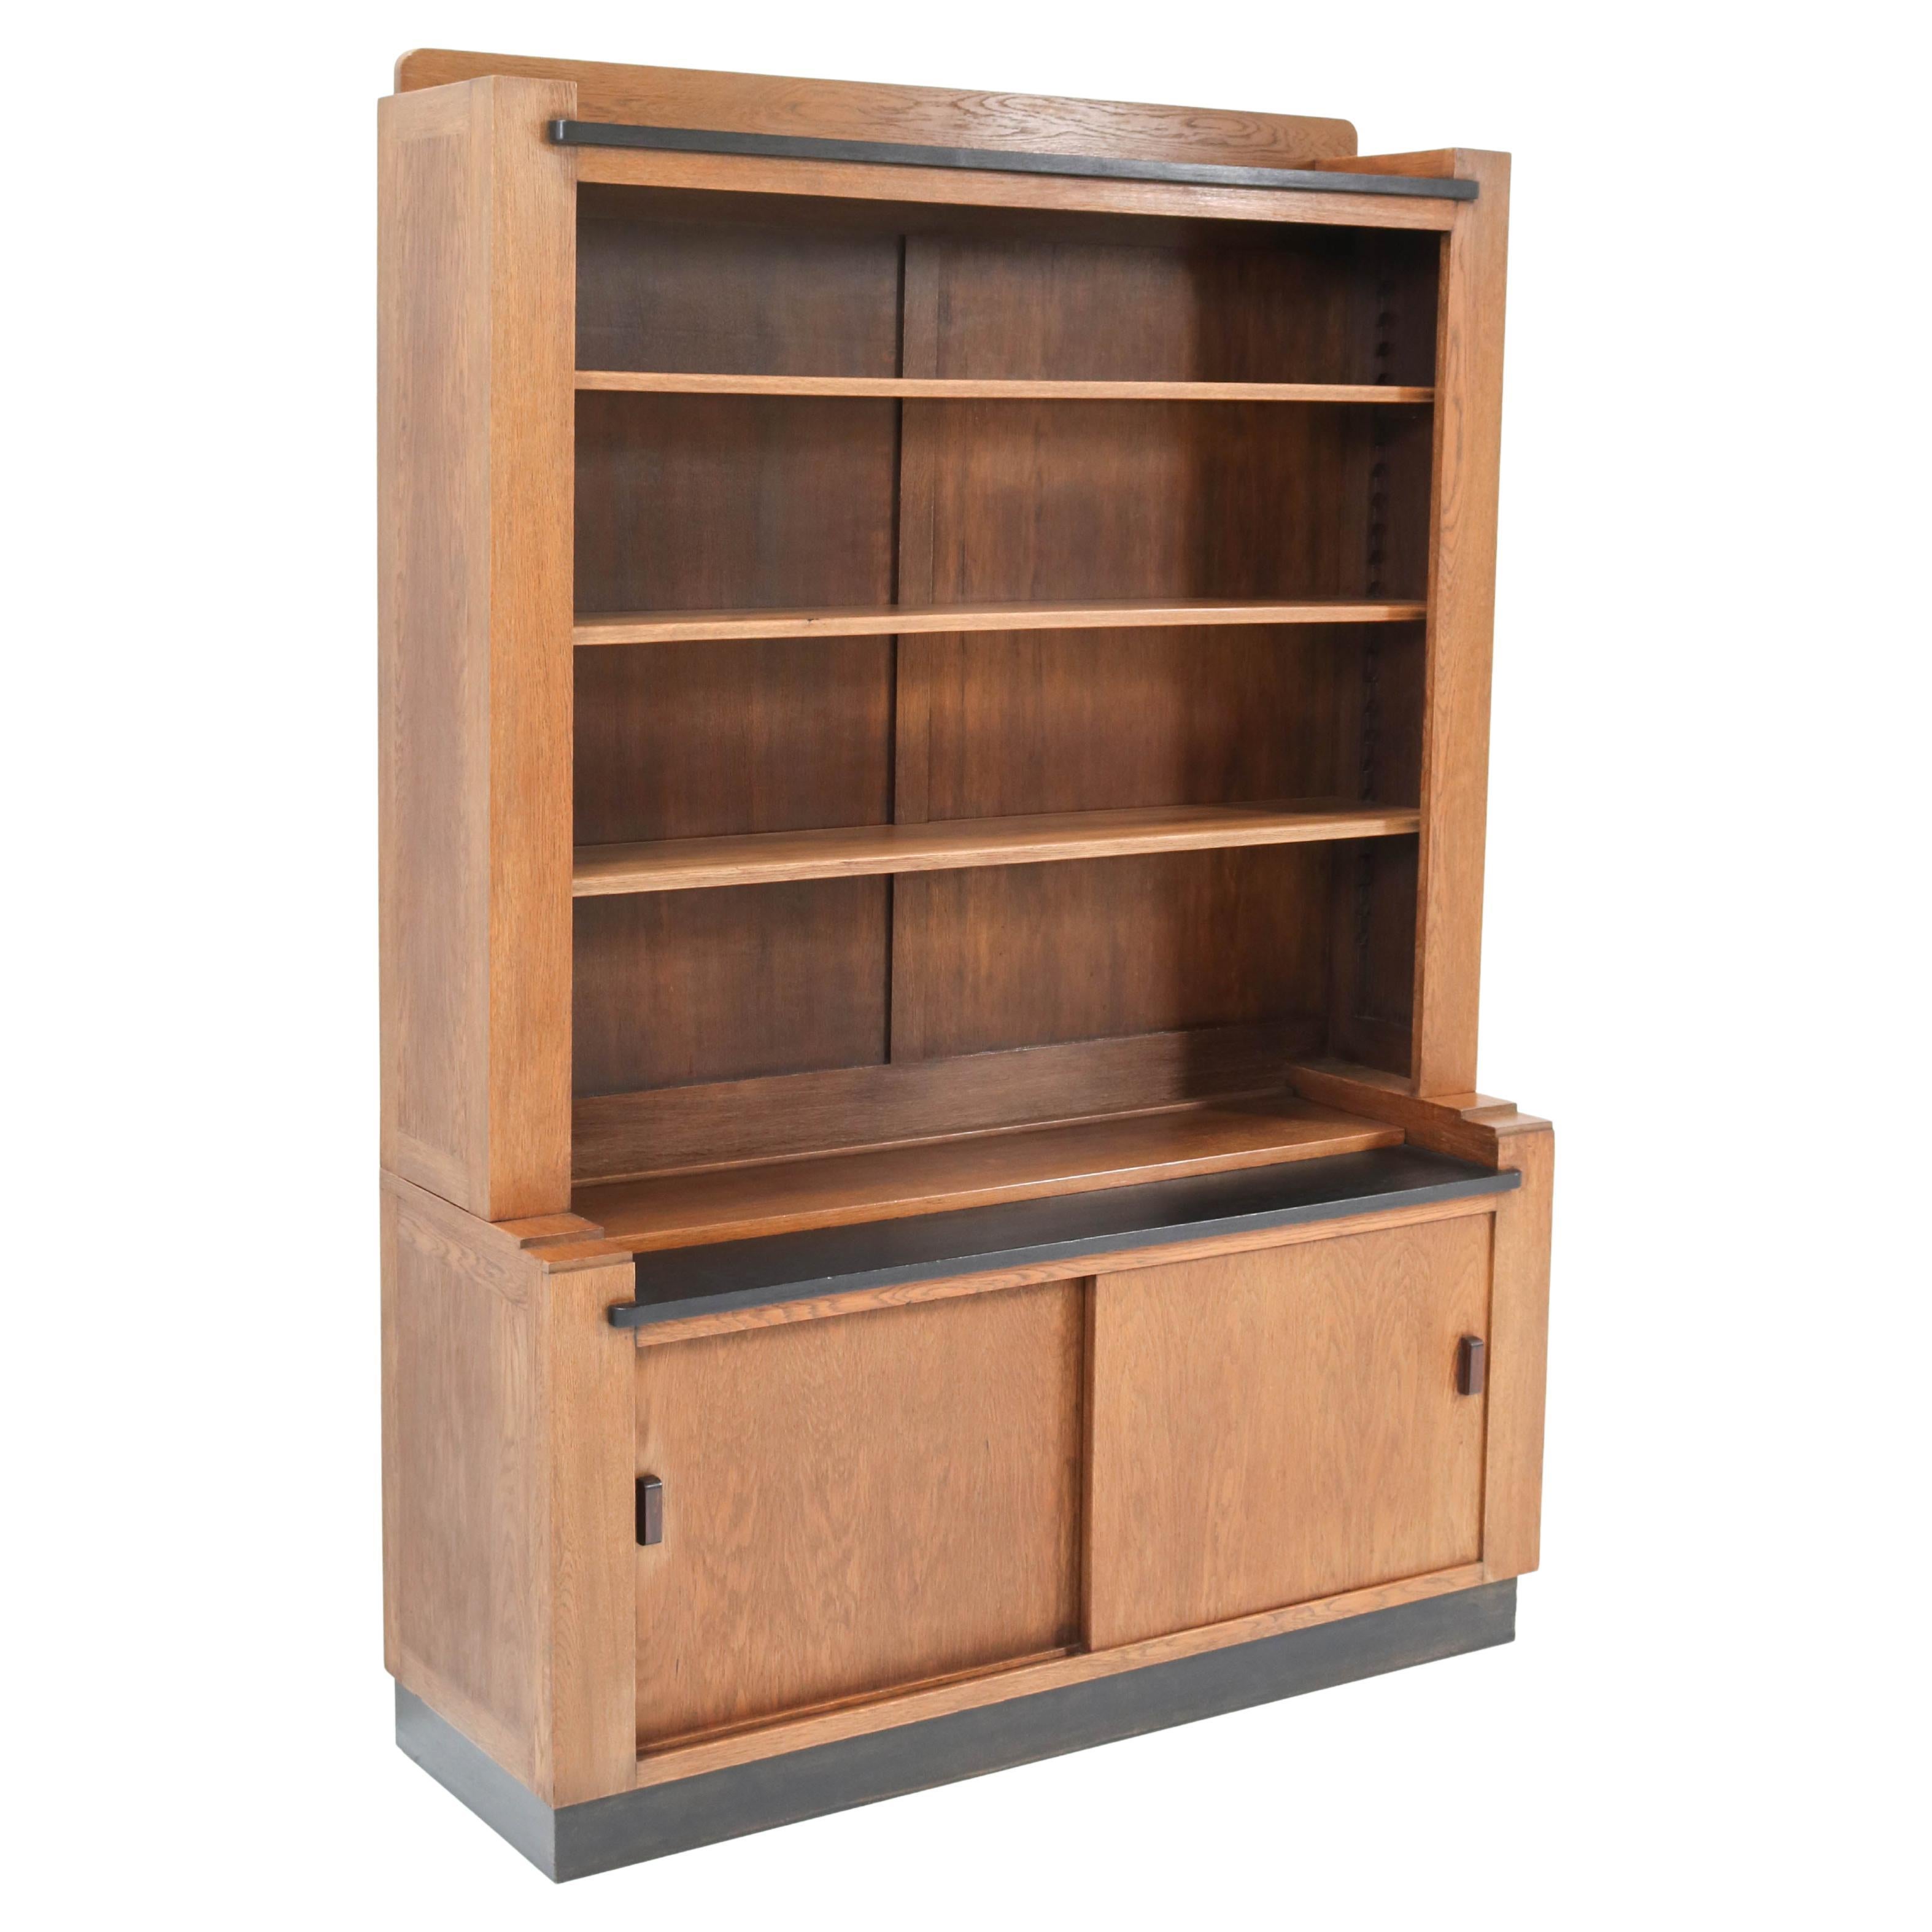 Oak Art Deco Haagse School Bookcase by Cor Alons for L.O.V. Oosterbeek, 1920s